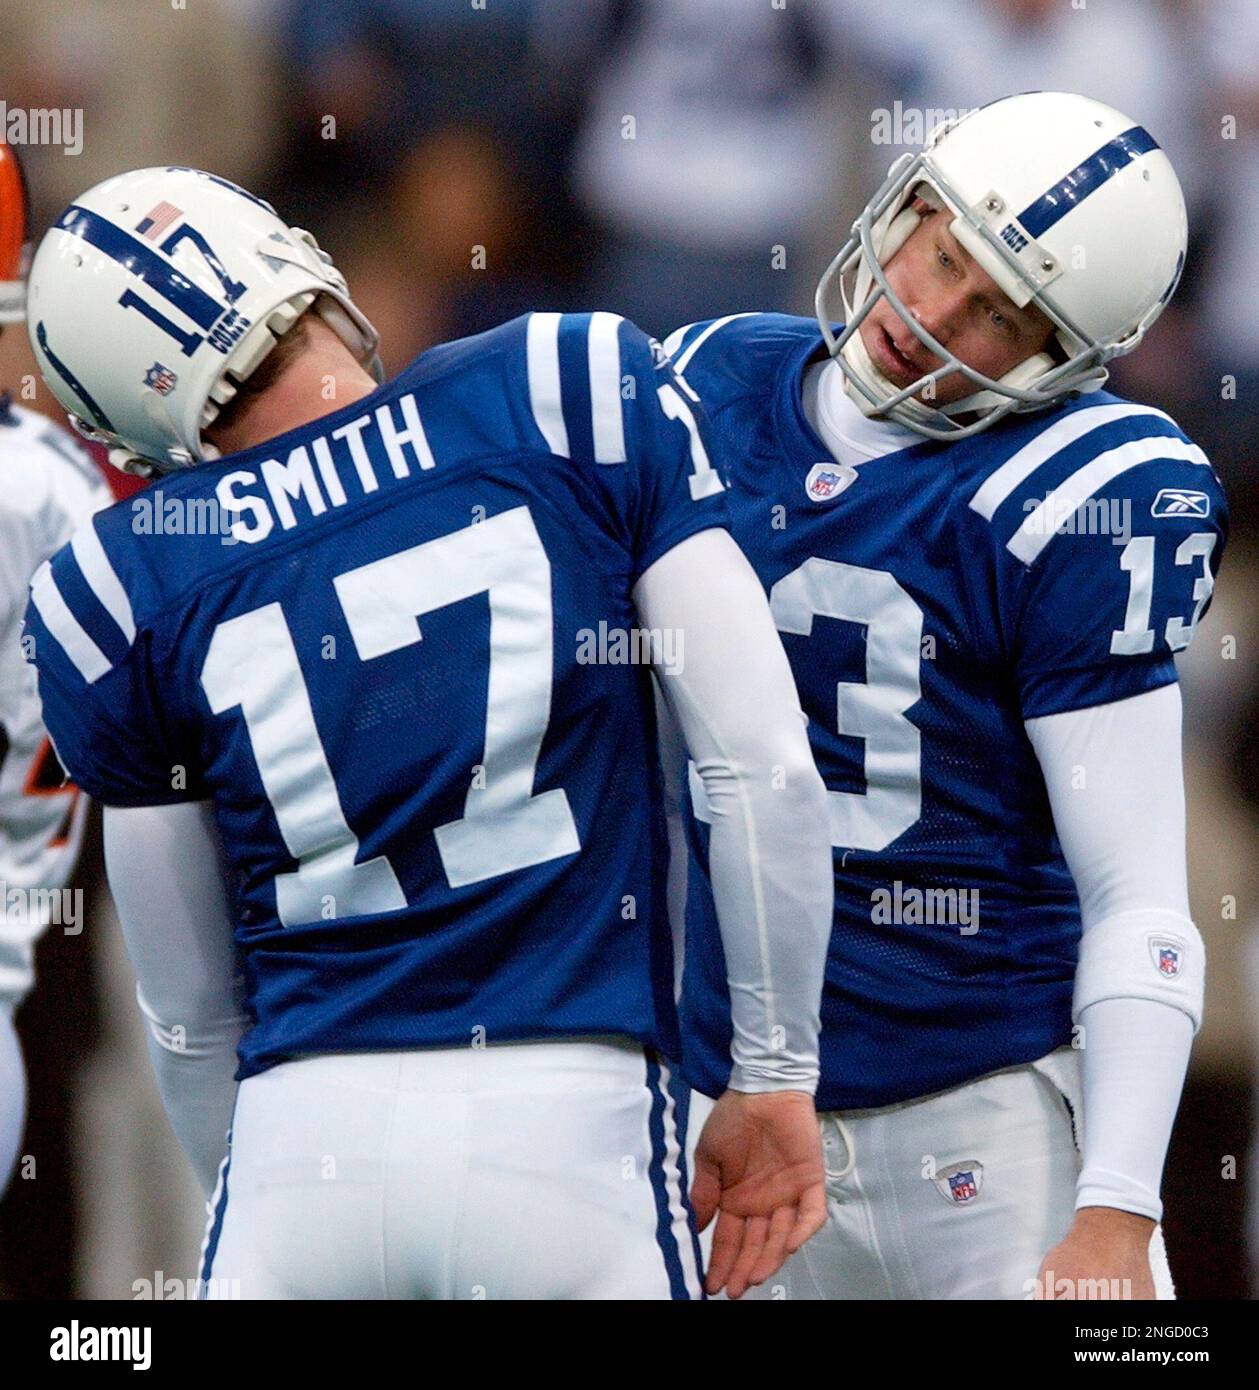 Indianapolis Colts kicker Mike Vanderjagt, right, celebrates with hold Hunter Smith after a field goal in the second half of the AFC wild-card game in Indianapolis, Sunday, Jan